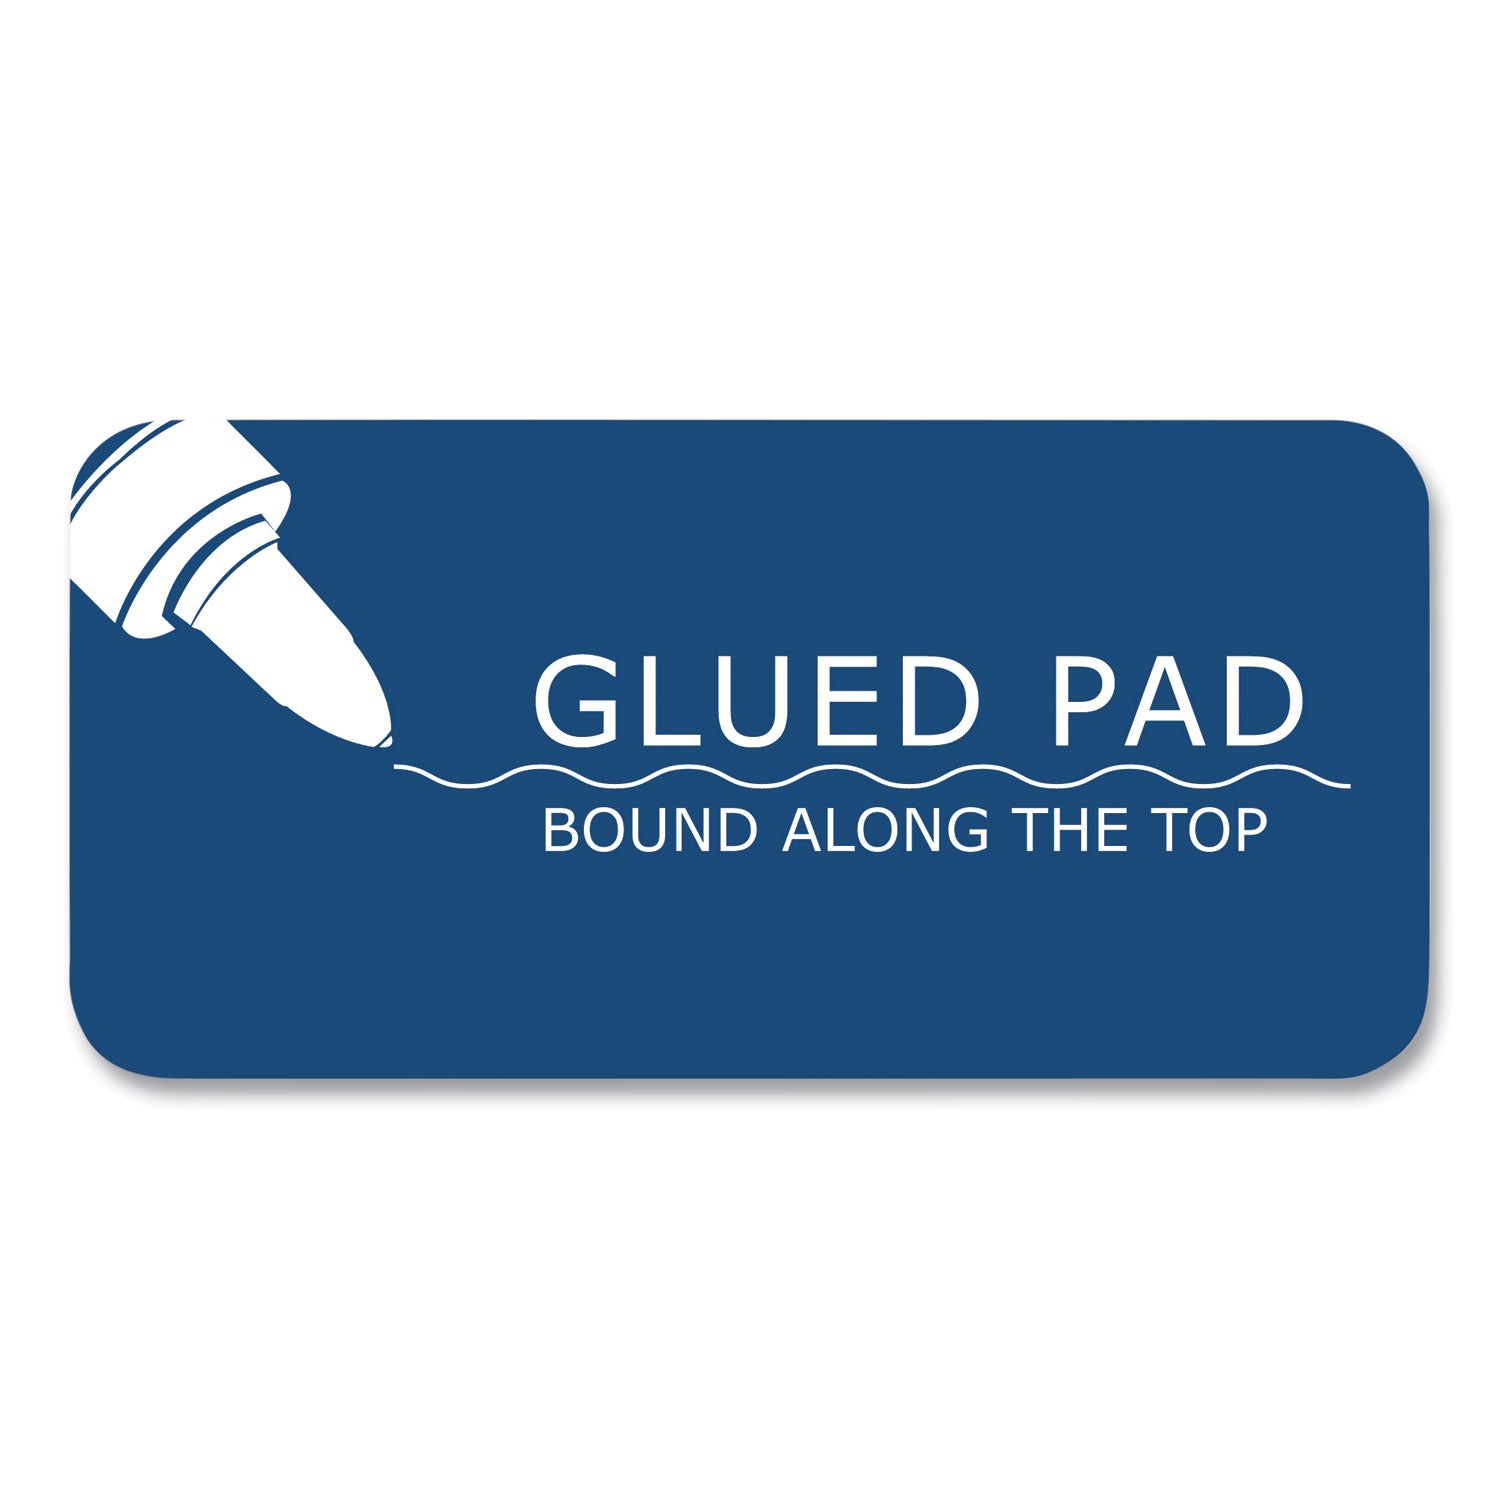 gummed-pad-4-sq-in-quadrille-rule-50-white-85-x-11-sheets-72-carton-ships-in-4-6-business-days_roa95160cs - 5